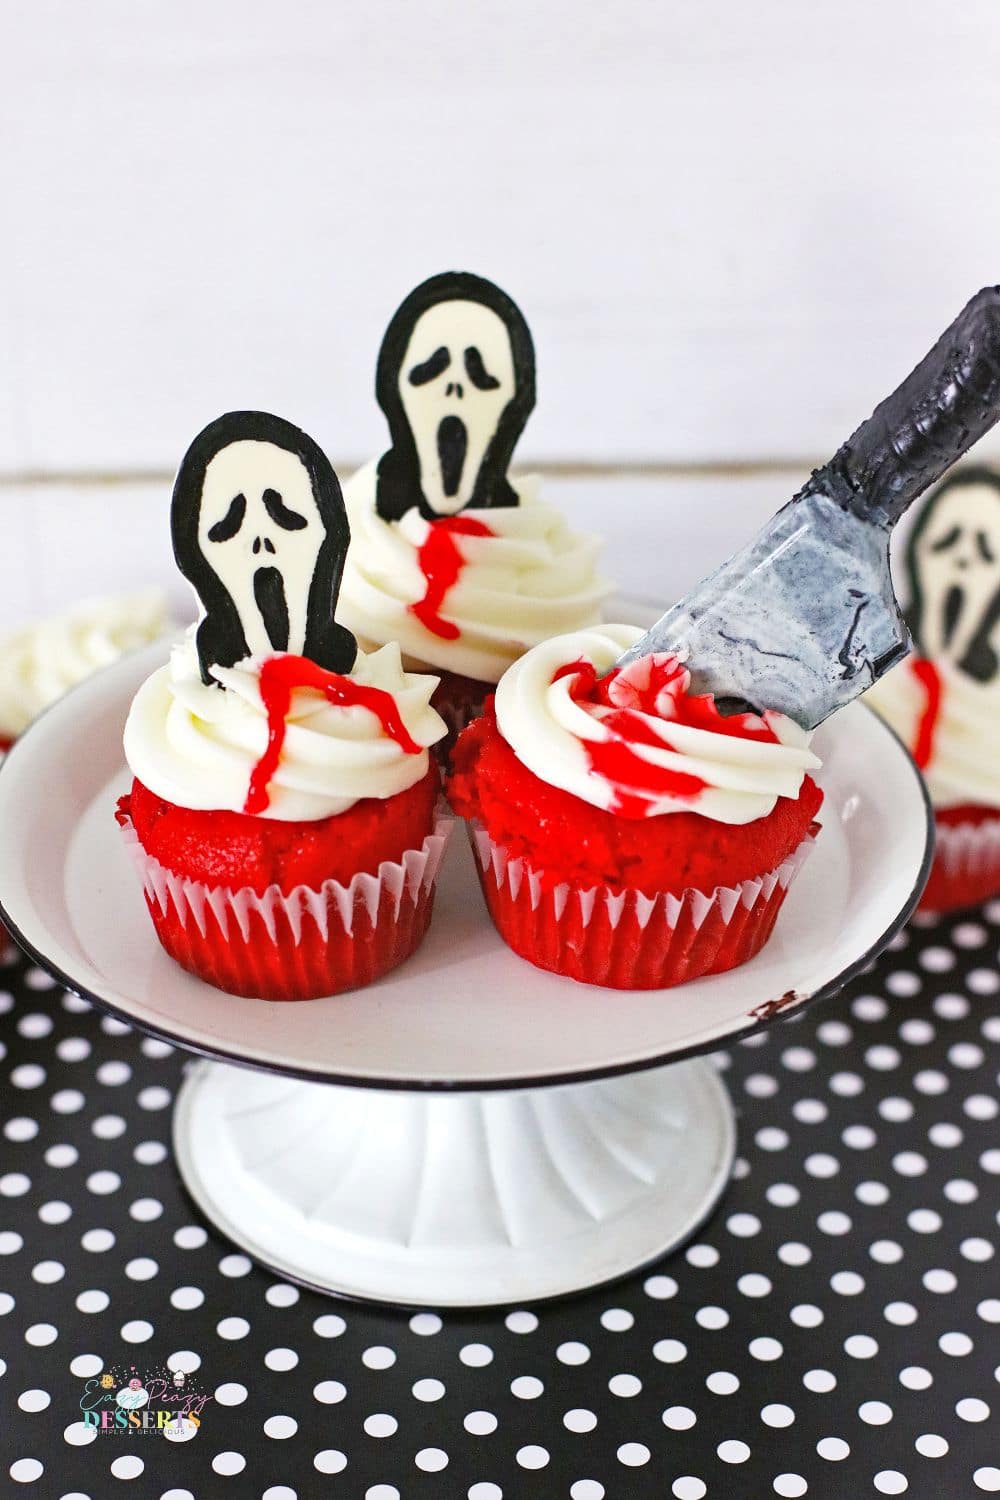 Easy Halloween cupcakes decorated with chocolate scream faces and knives